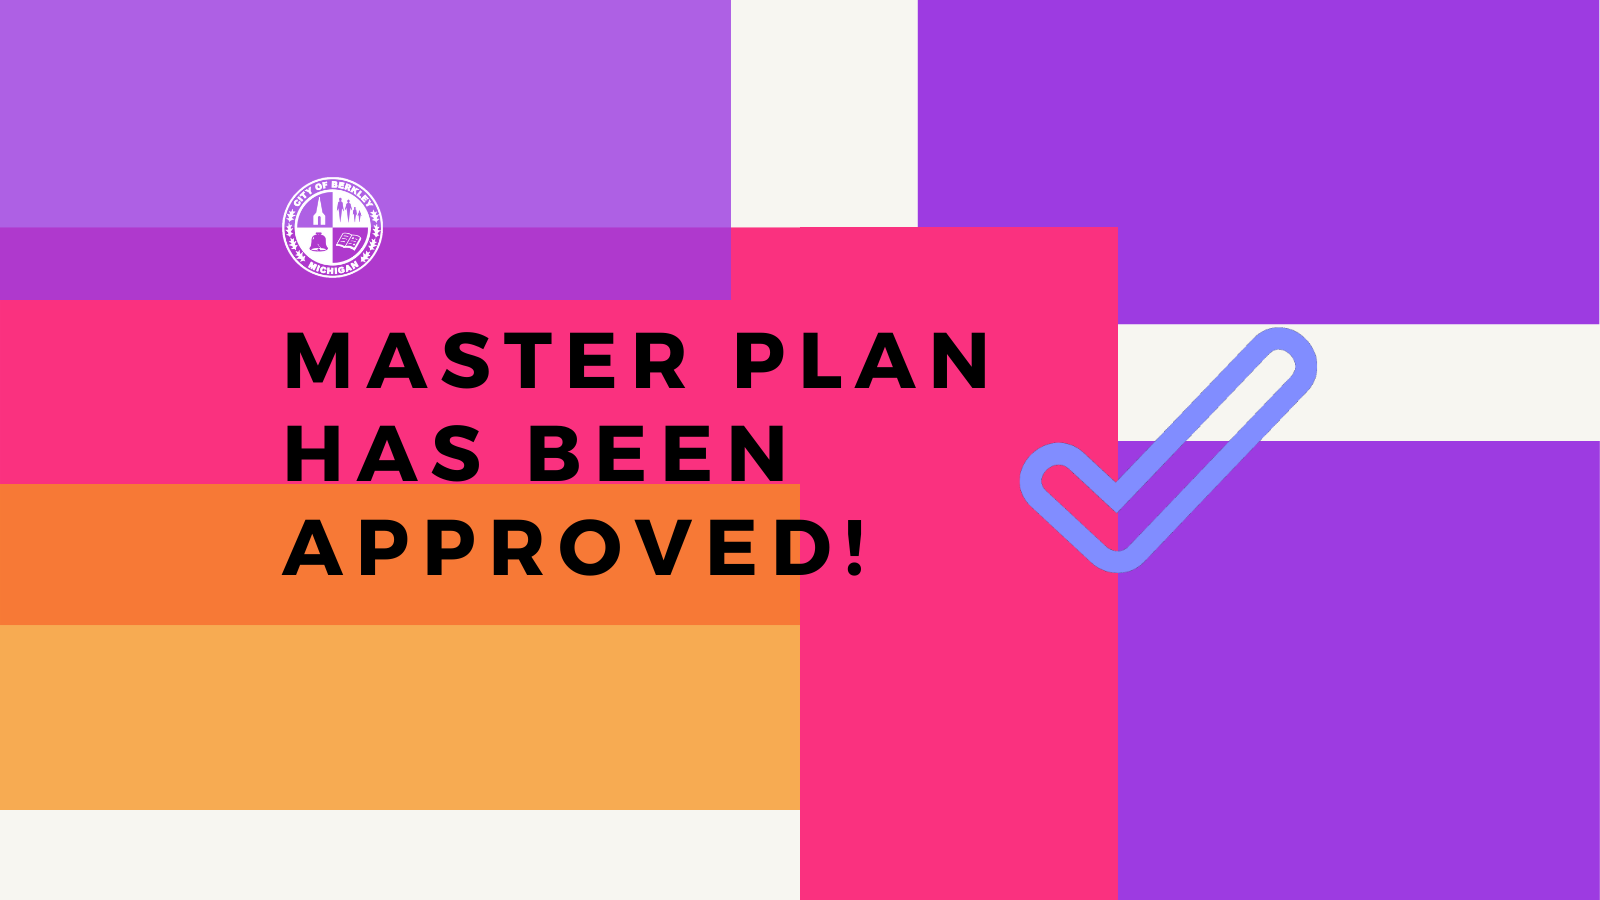 Masterplan Approved - Twitter